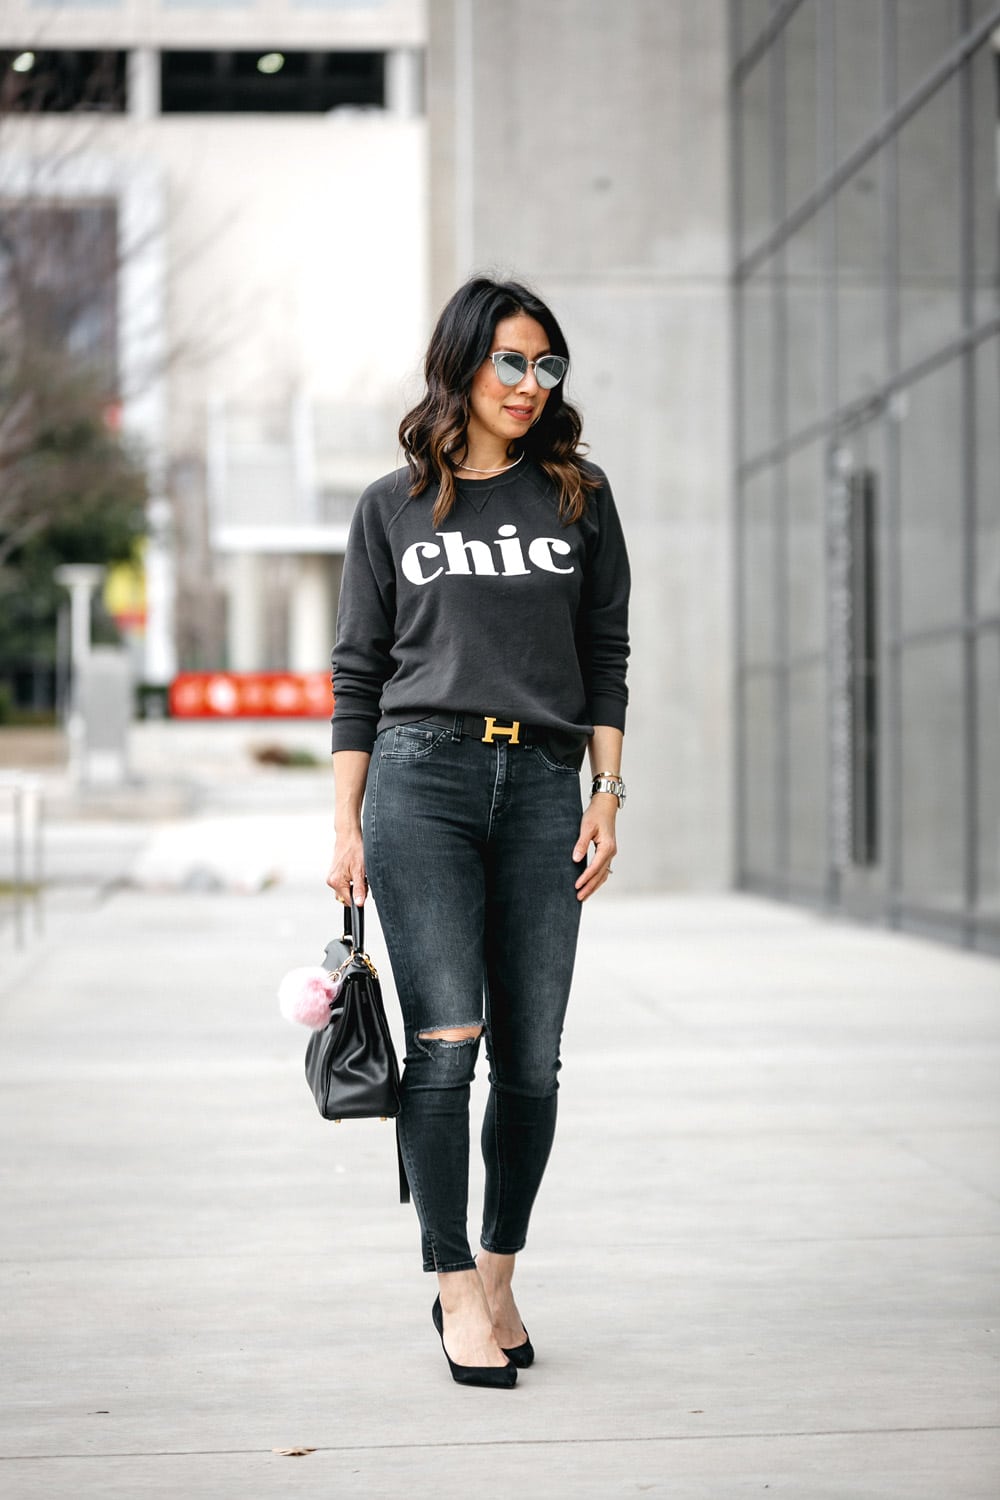 chic sol angeles sweatshirt all black outfit